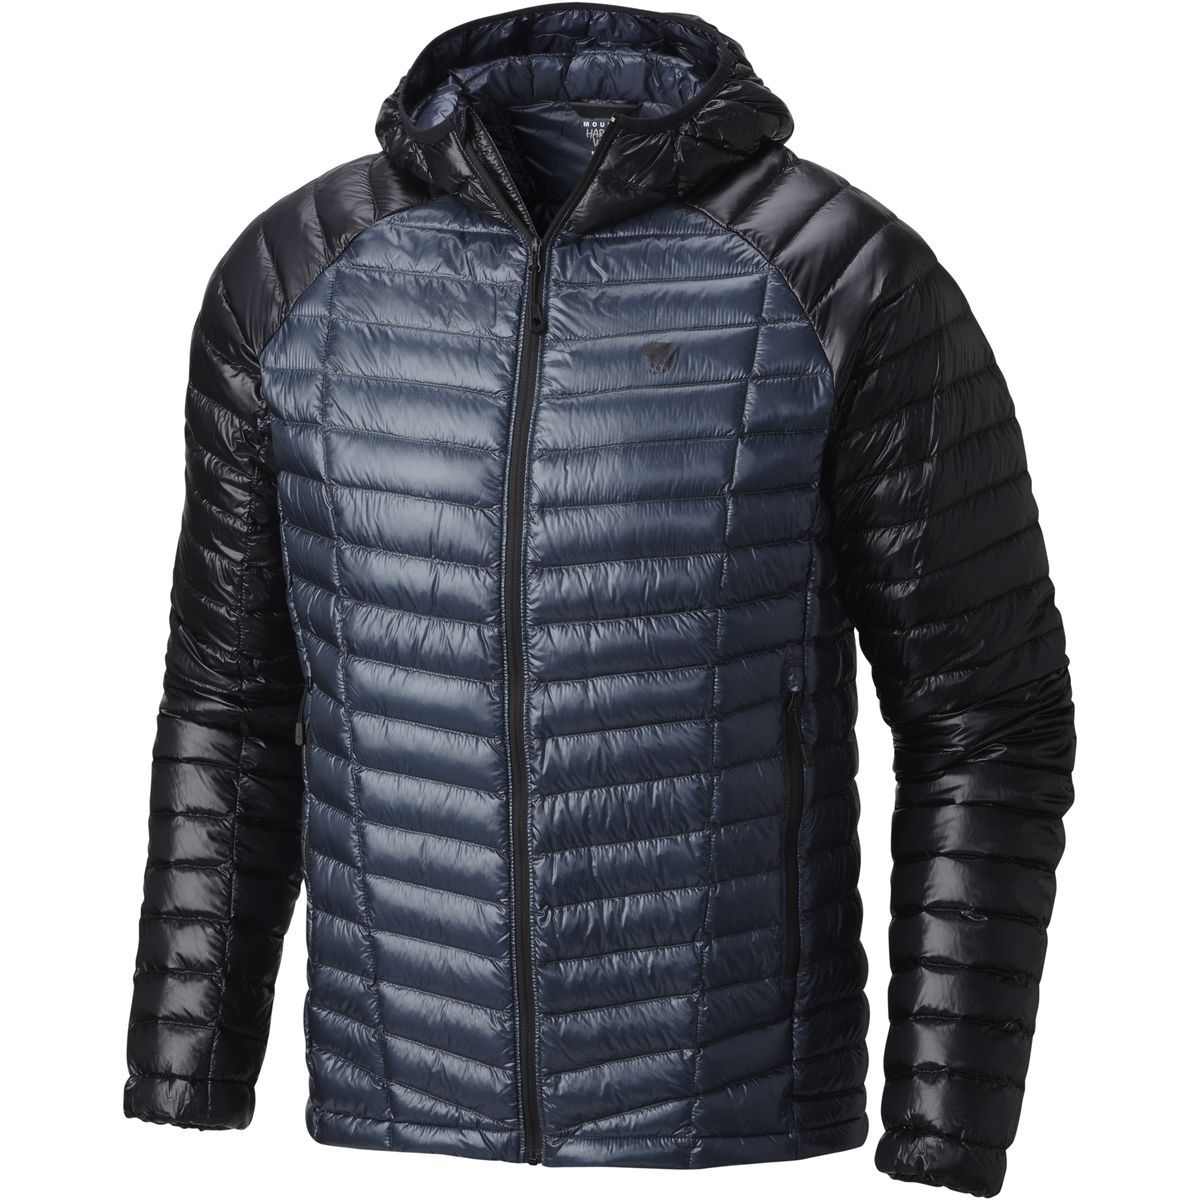 YAOTT Mens Hooded Down Jacket Lightweight Packable Quilted Puffer Jacket with Zipper Pockets Winter Coat Outdoor with Hood 